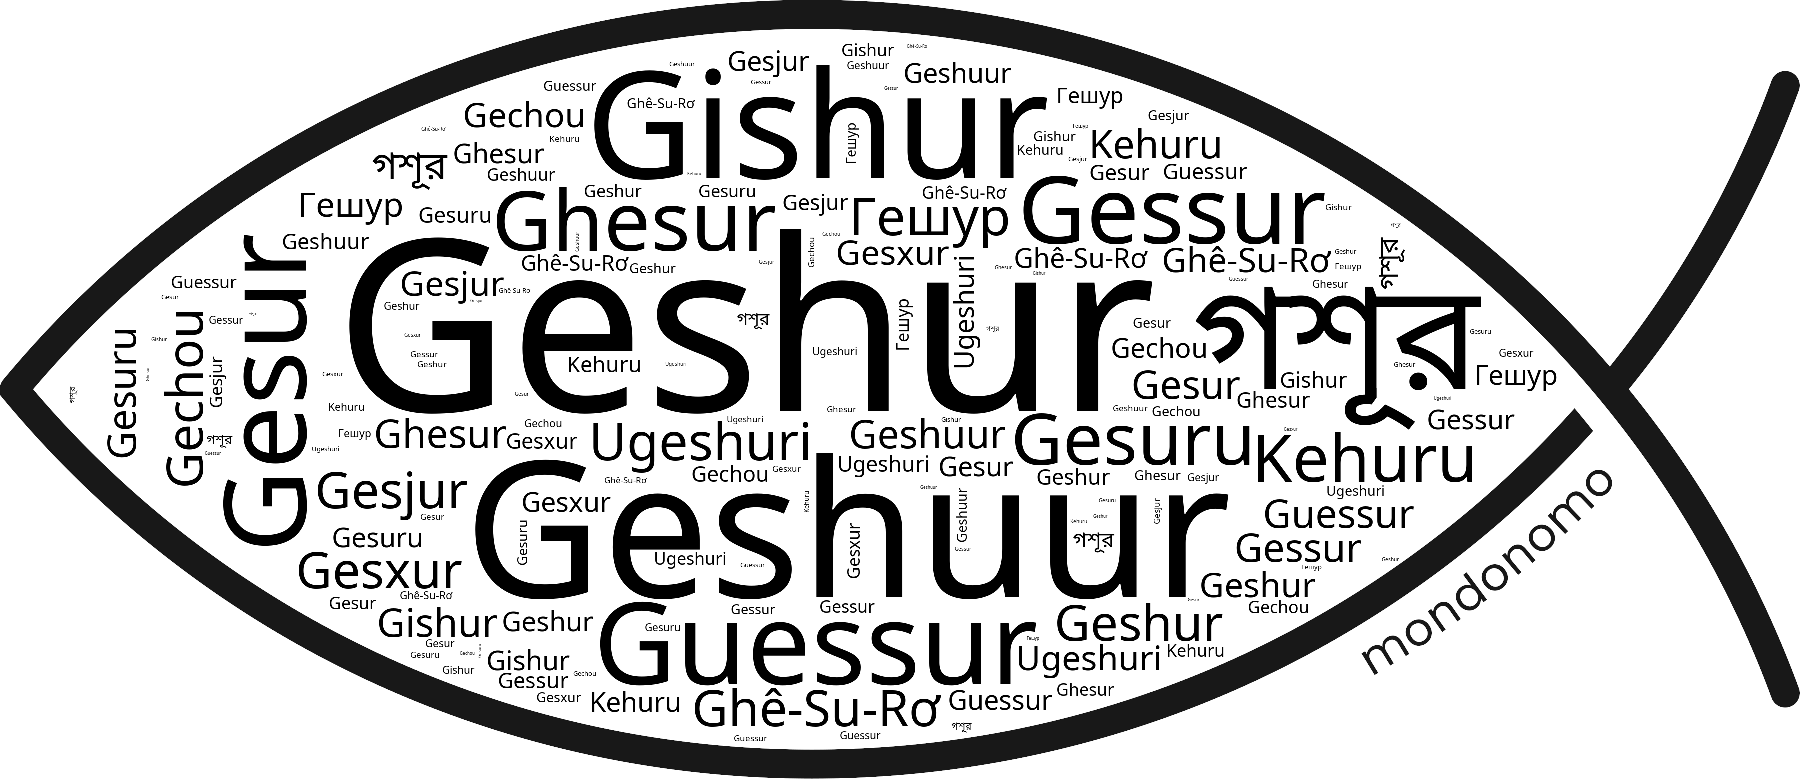 Name Geshur in the world's Bibles